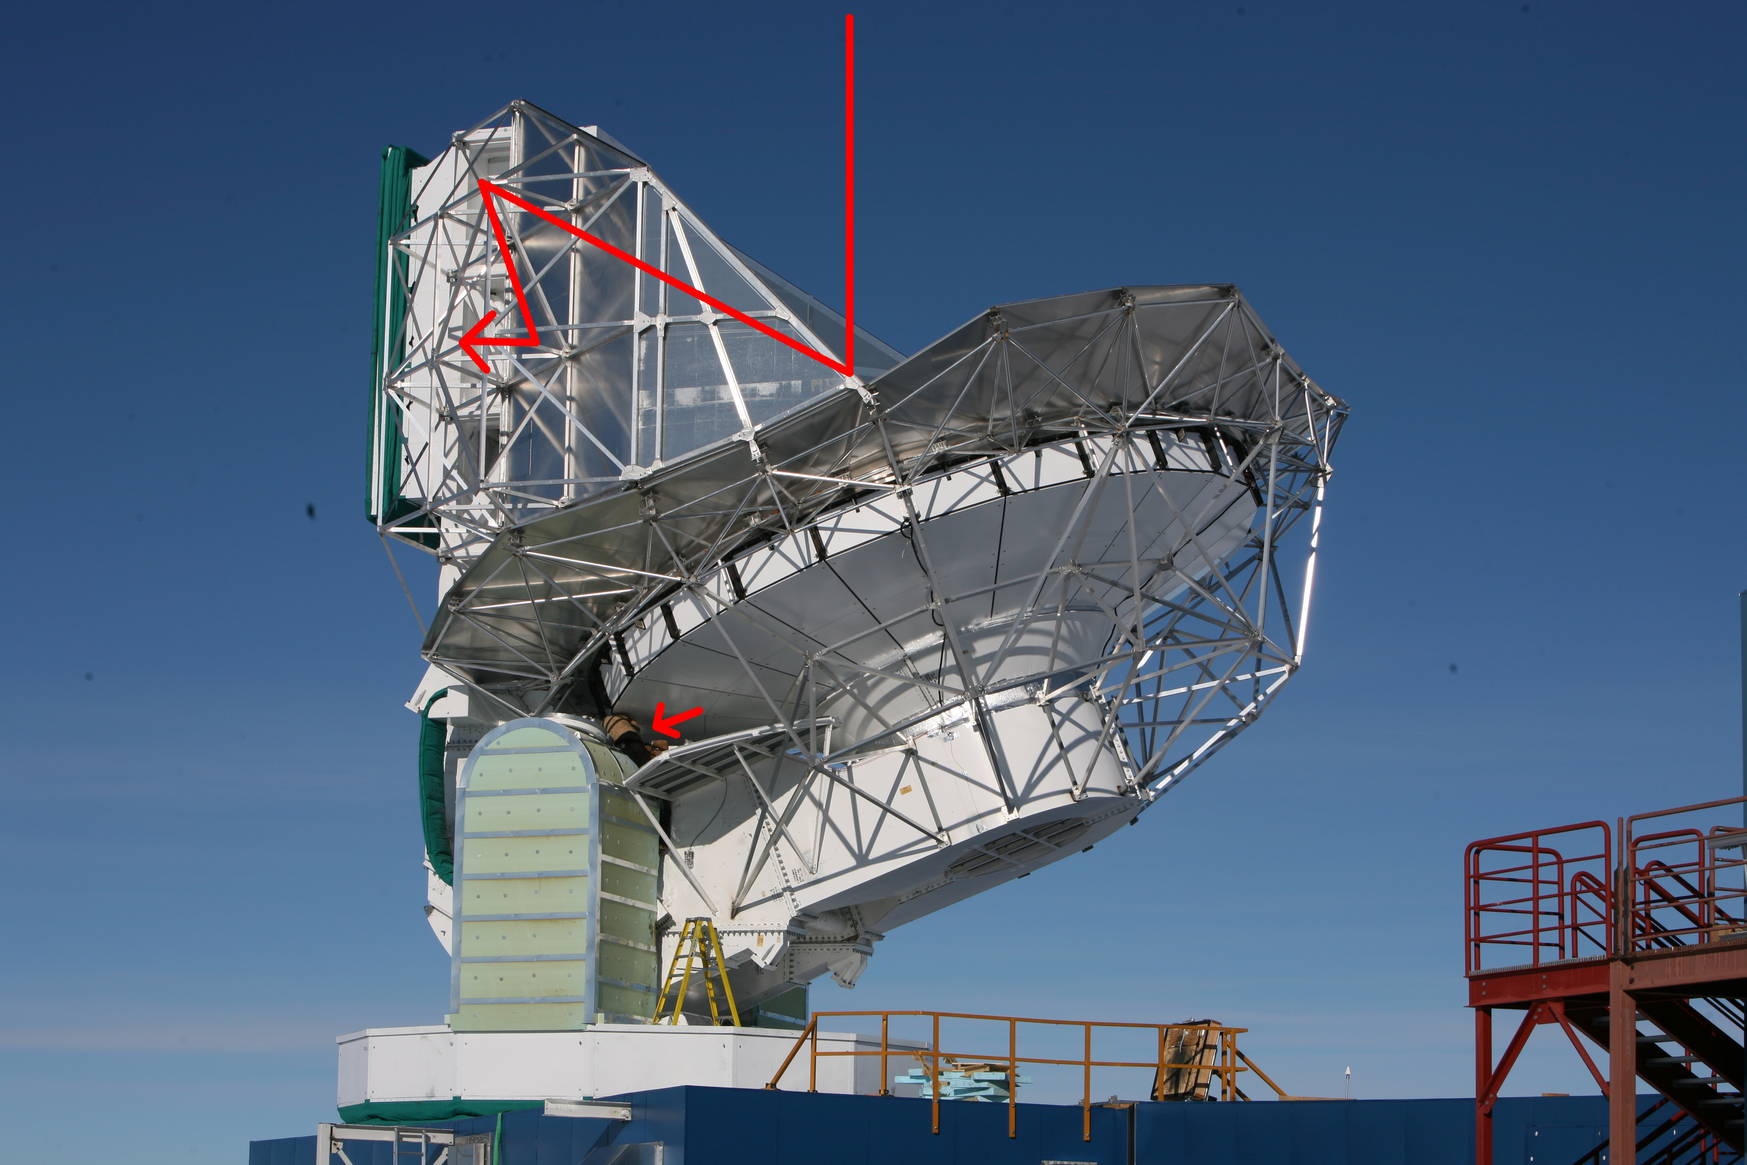 The South Pole Telescope rotates around two axes and can observe anywhere on the sky. Here it points straight up, observing a source in the zenith. The red arrows indicate the path of the microwave light, bouncing off the primary mirror (the big silver dish) into the receiver cabin. There it is reflected by the secondary and tertiary mirror, and then registered in a camera (which we call receiver). The arrow points out one of our colleagues for size comparison. He or she is greasing one of the mount bearings. 